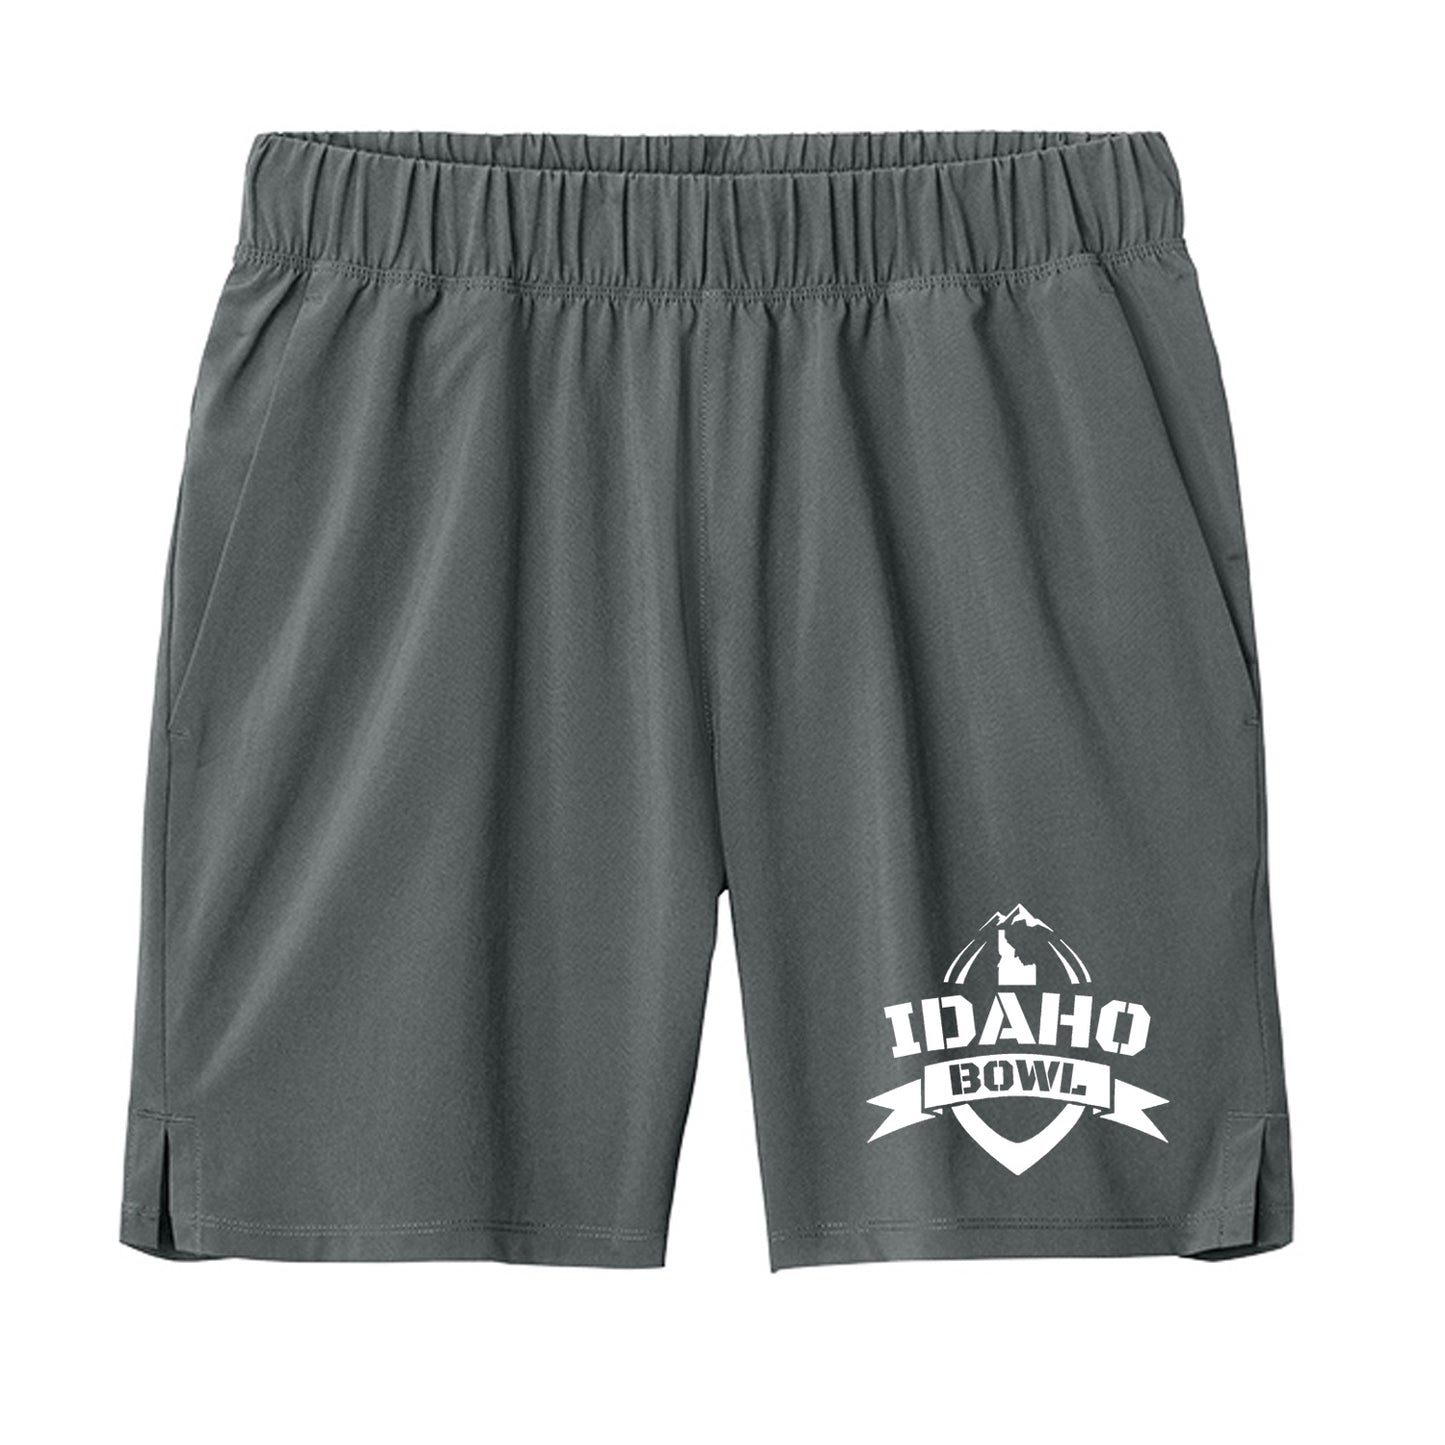 Idaho Bowl - Polyester Blend 7" Short - 2 colors available